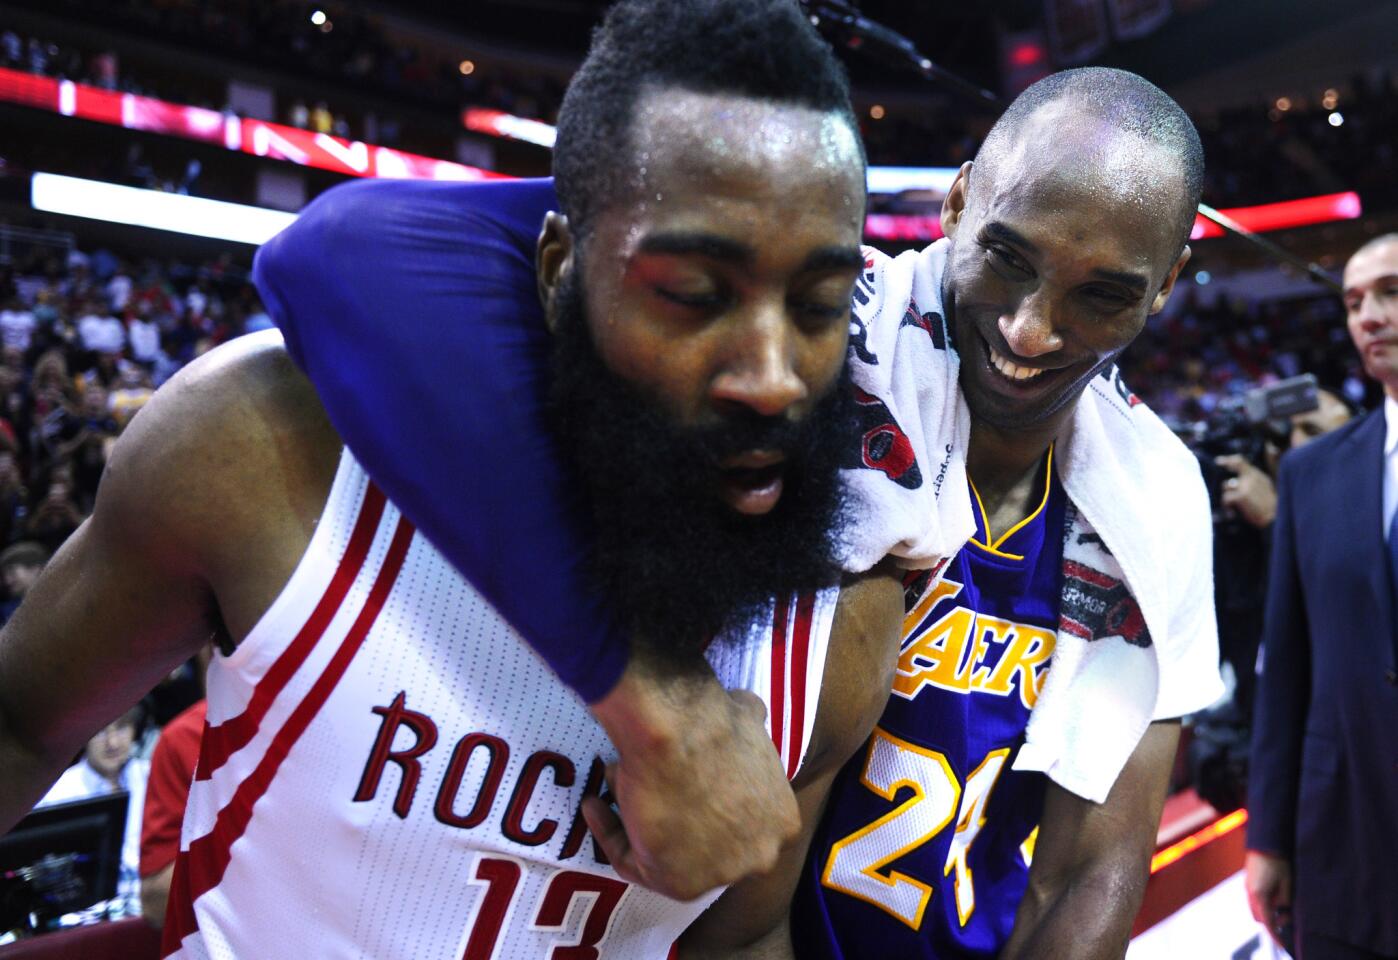 Kobe Bryant has a little fun with Rockets star James Harden after the game in Houston.